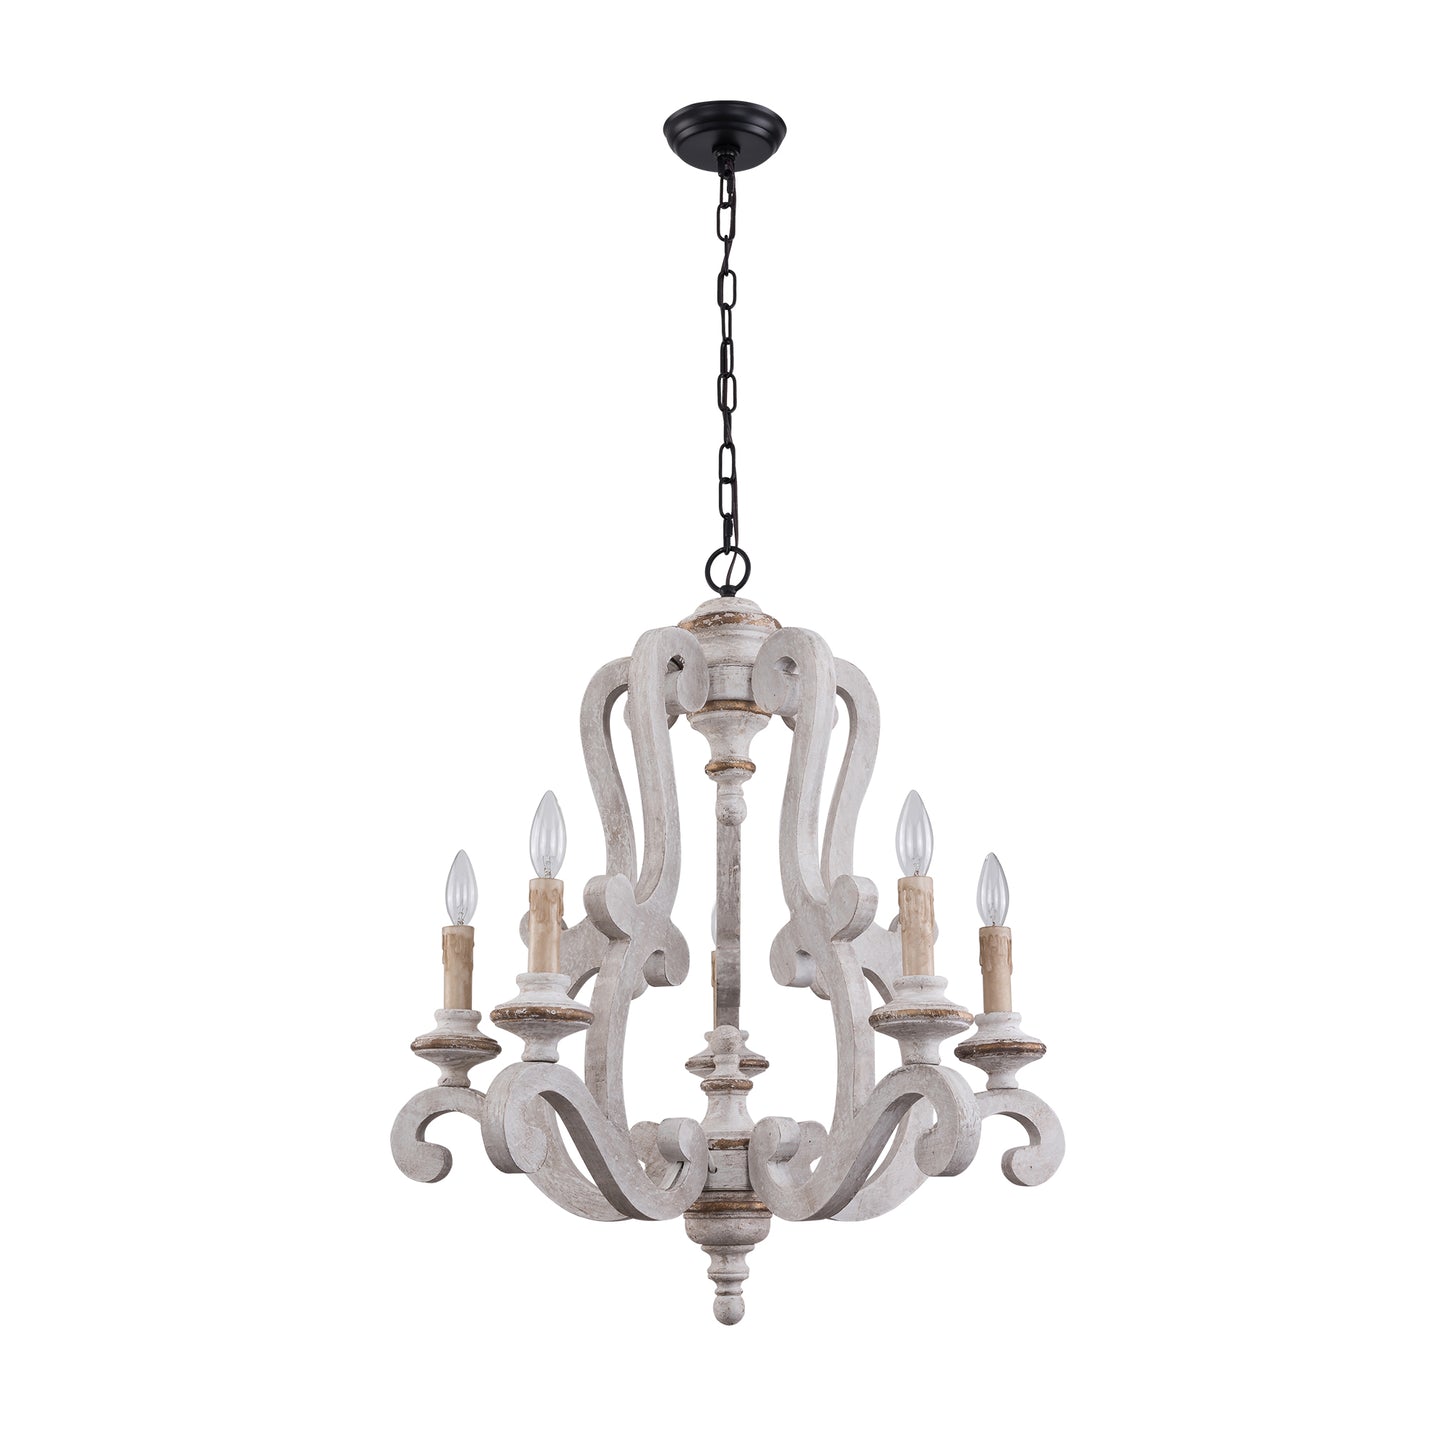 Antique 5-Light Candle Chandelier with Farmhouse Pendant Lights for Dining Room, Bedroom, and Living Room